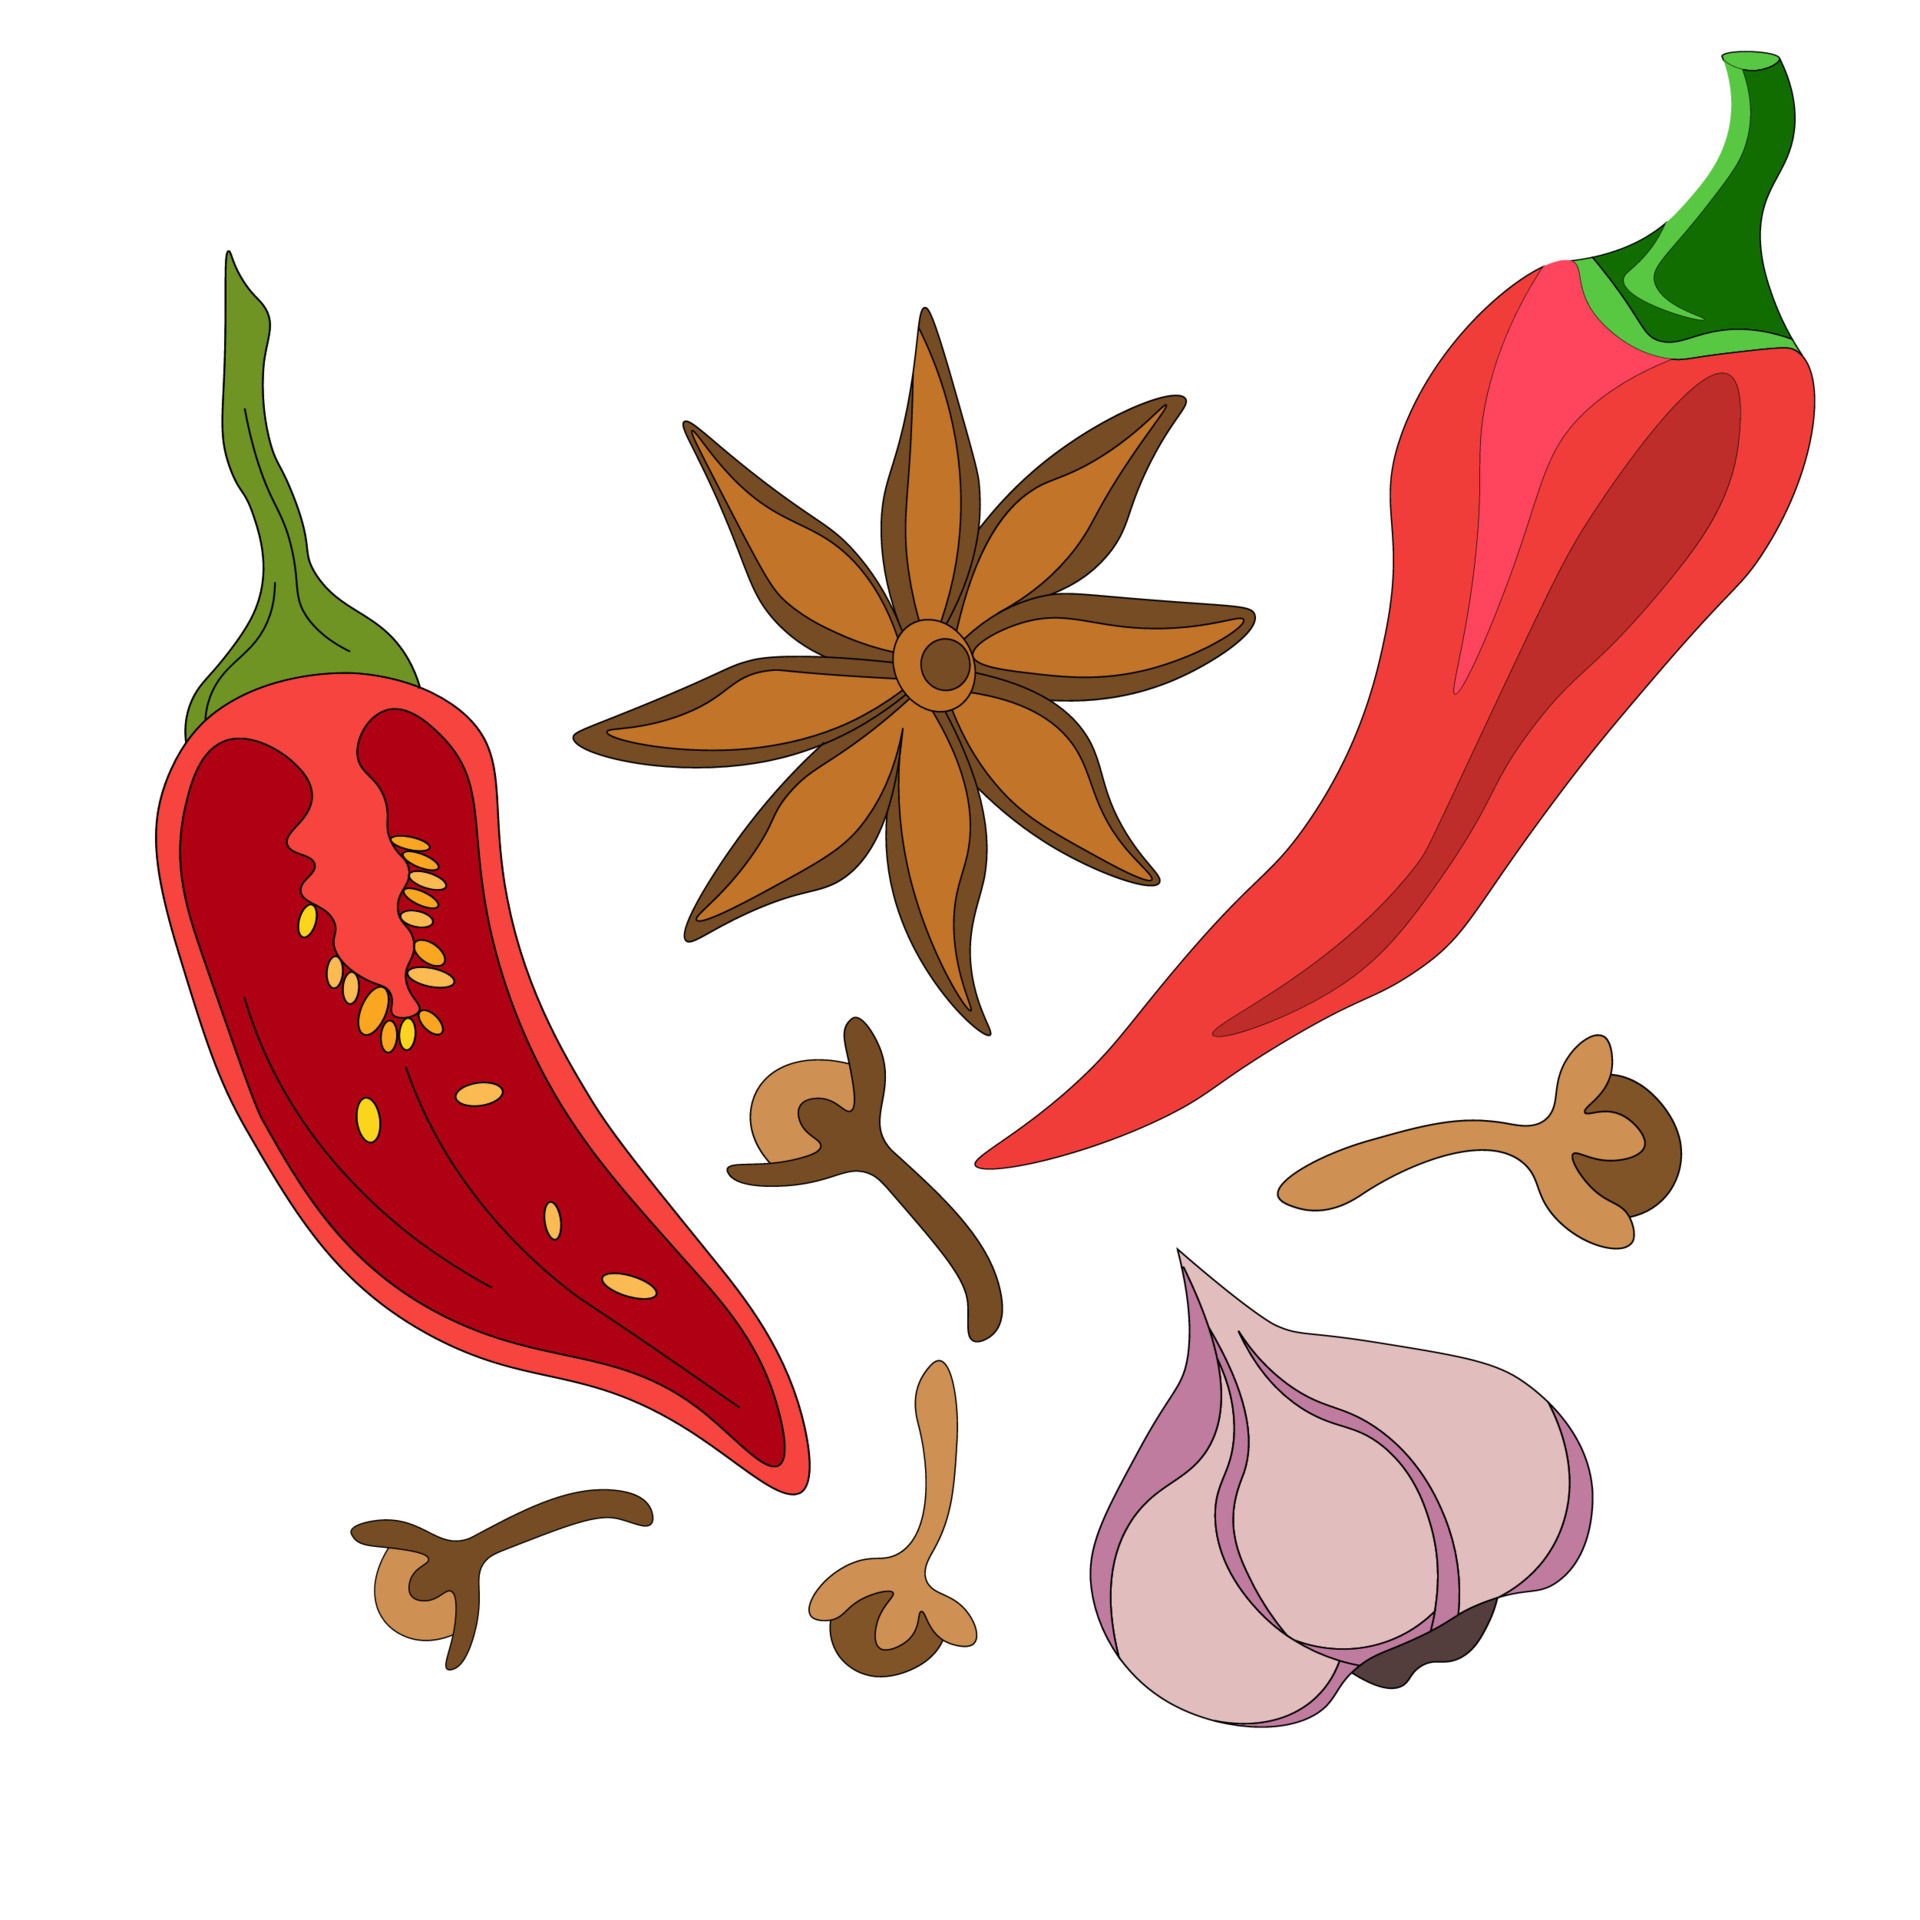 https://static.vecteezy.com/system/resources/previews/006/127/040/original/red-chili-pepper-hot-spice-for-food-set-of-spices-cloves-anise-stars-chili-pepper-garlic-drawings-in-the-doodle-style-organic-product-for-farmer-s-market-farm-design-local-store-vector.jpg